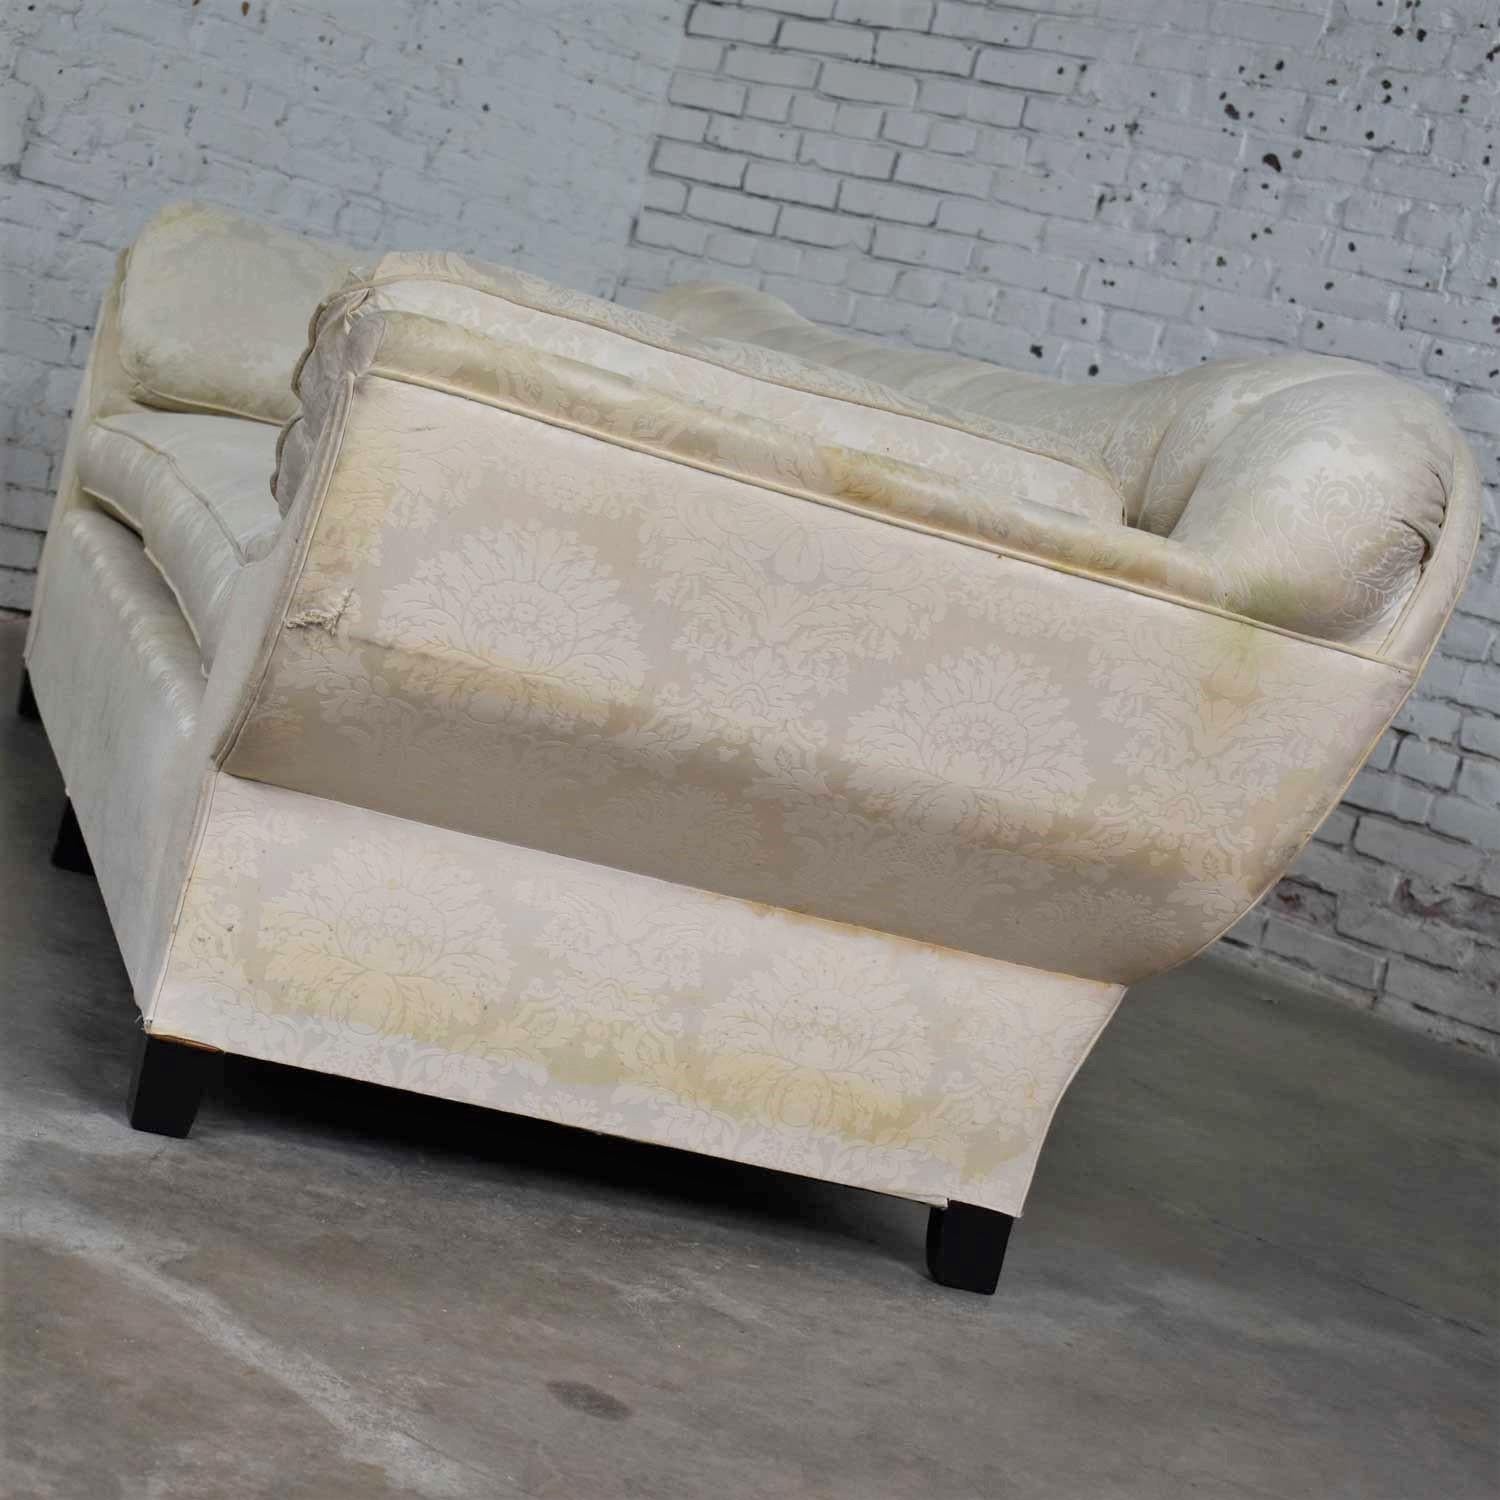 20th Century Vintage Art Deco Hollywood Regency Sofa Tufted Back and Concave Pillowed Arms For Sale